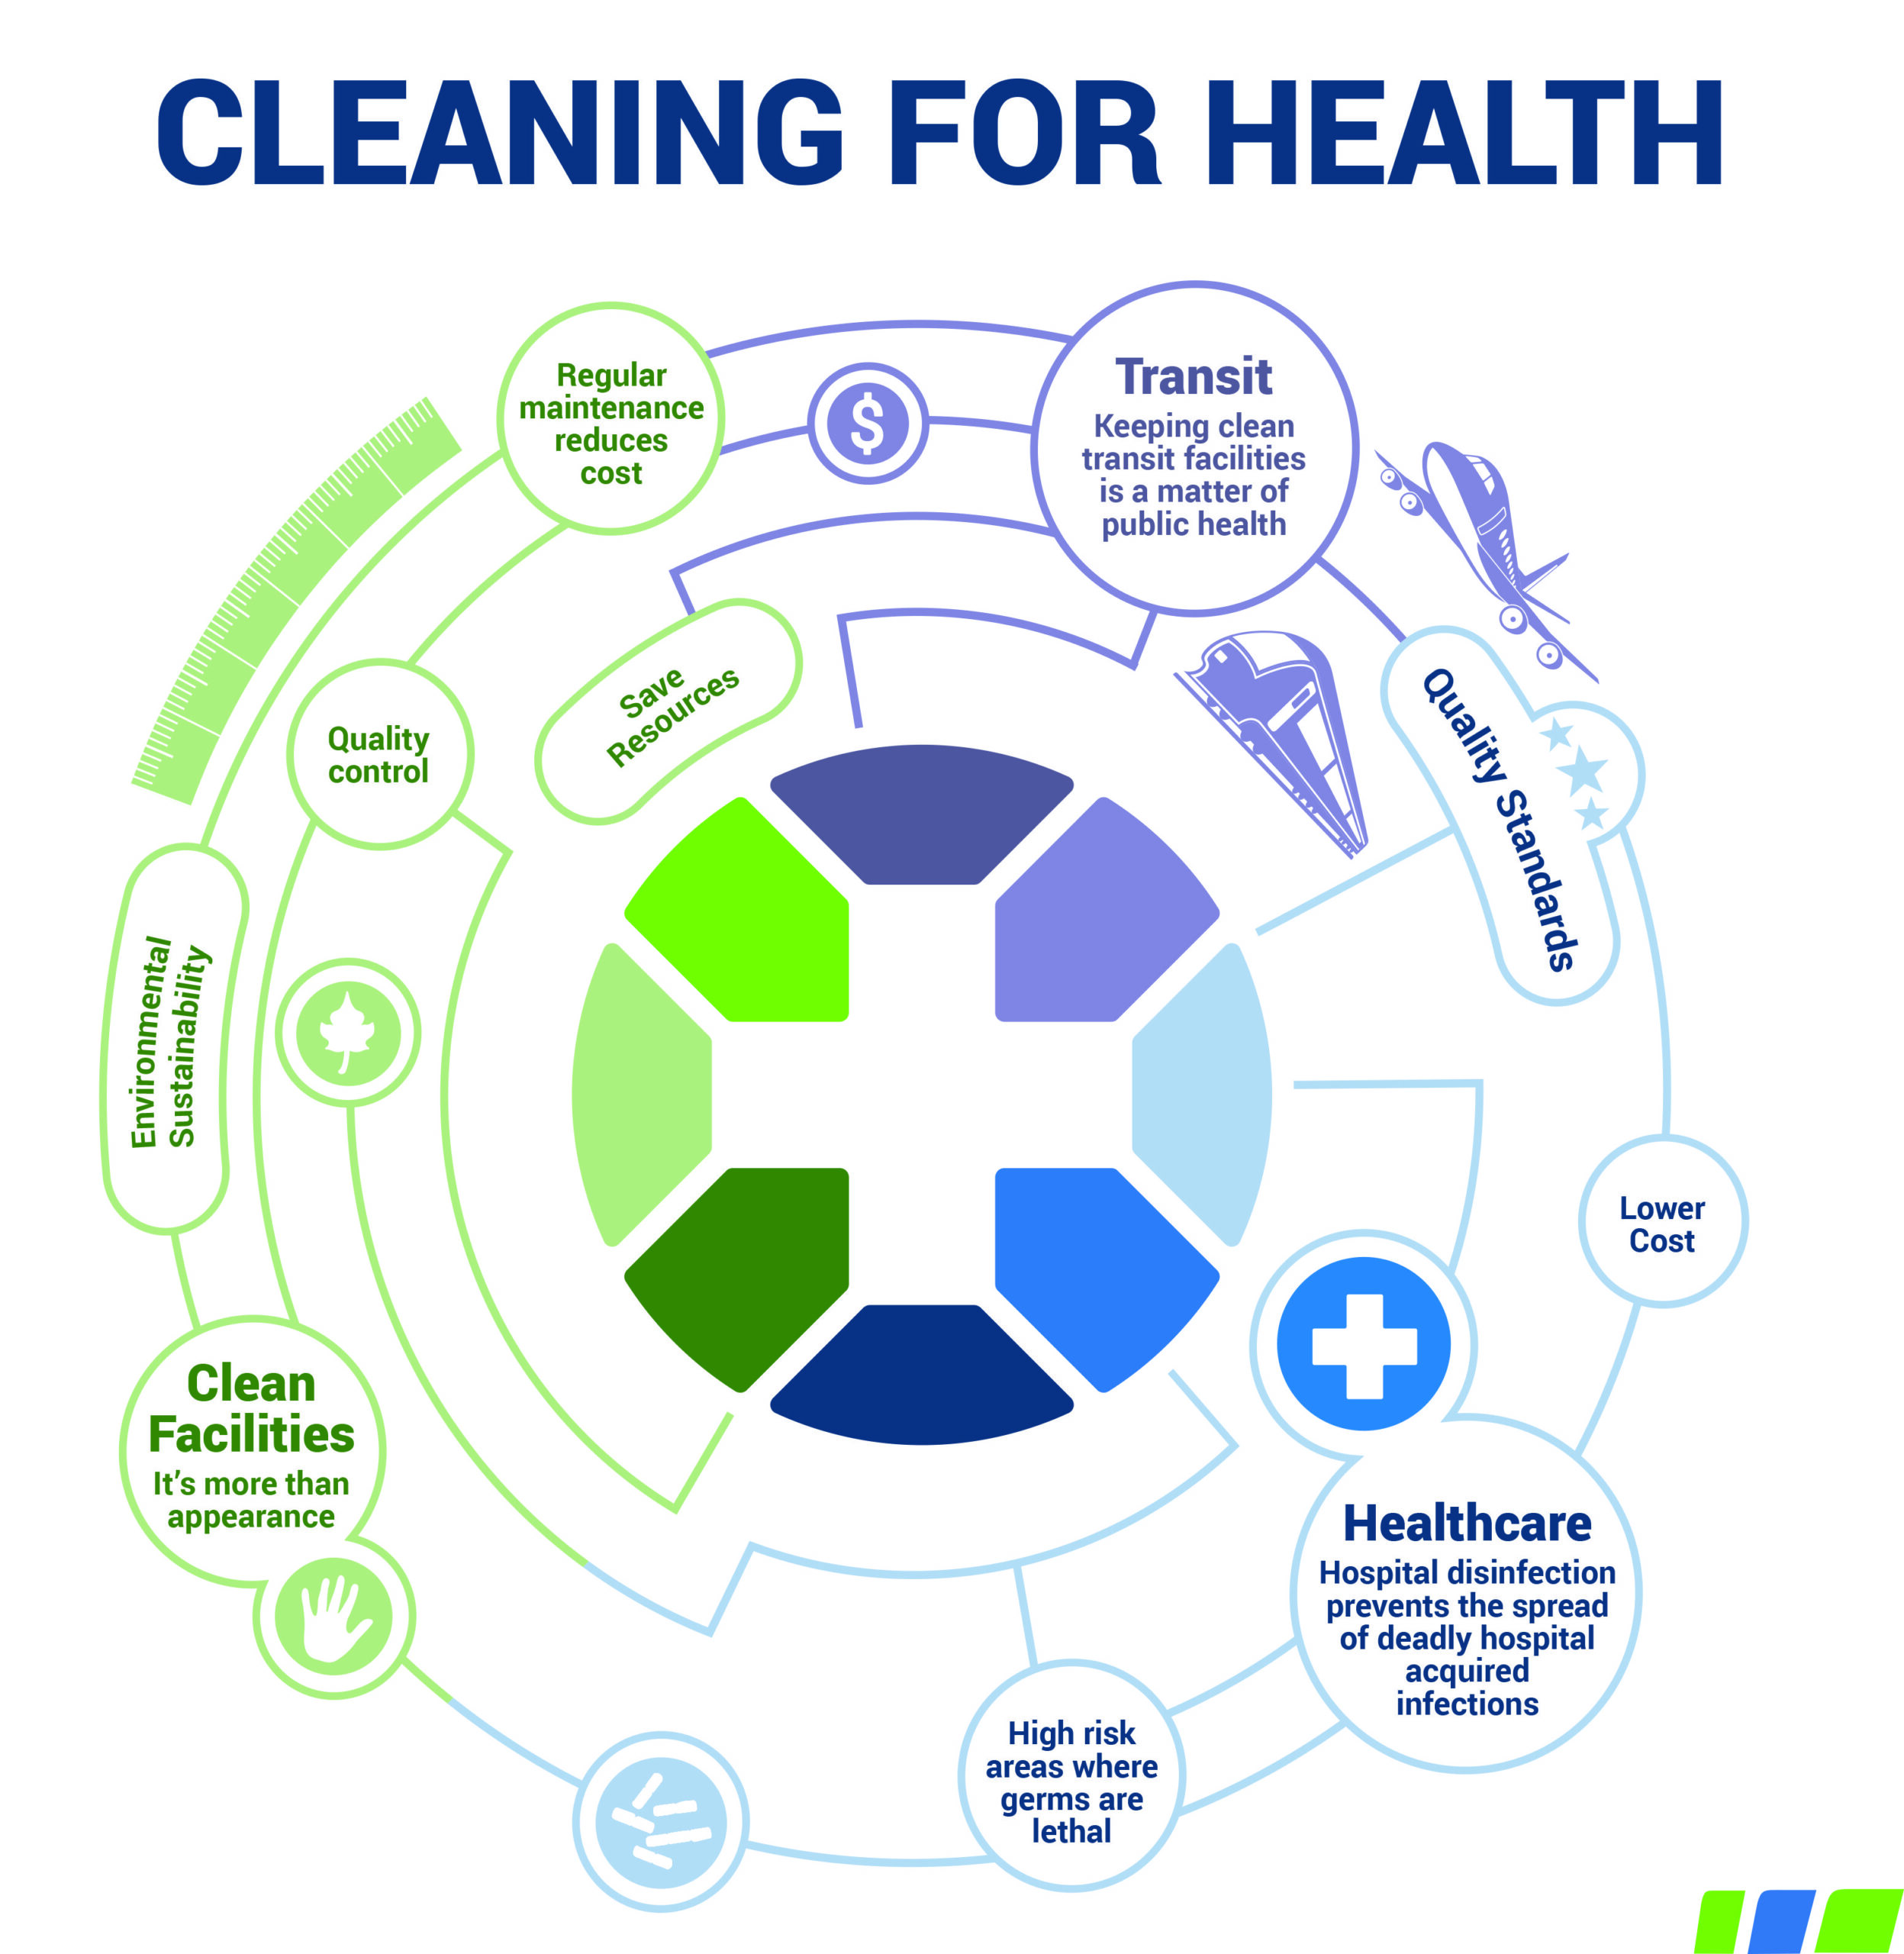 Cleaning for Health infographic including healthcare, transit and facilities cleaning.